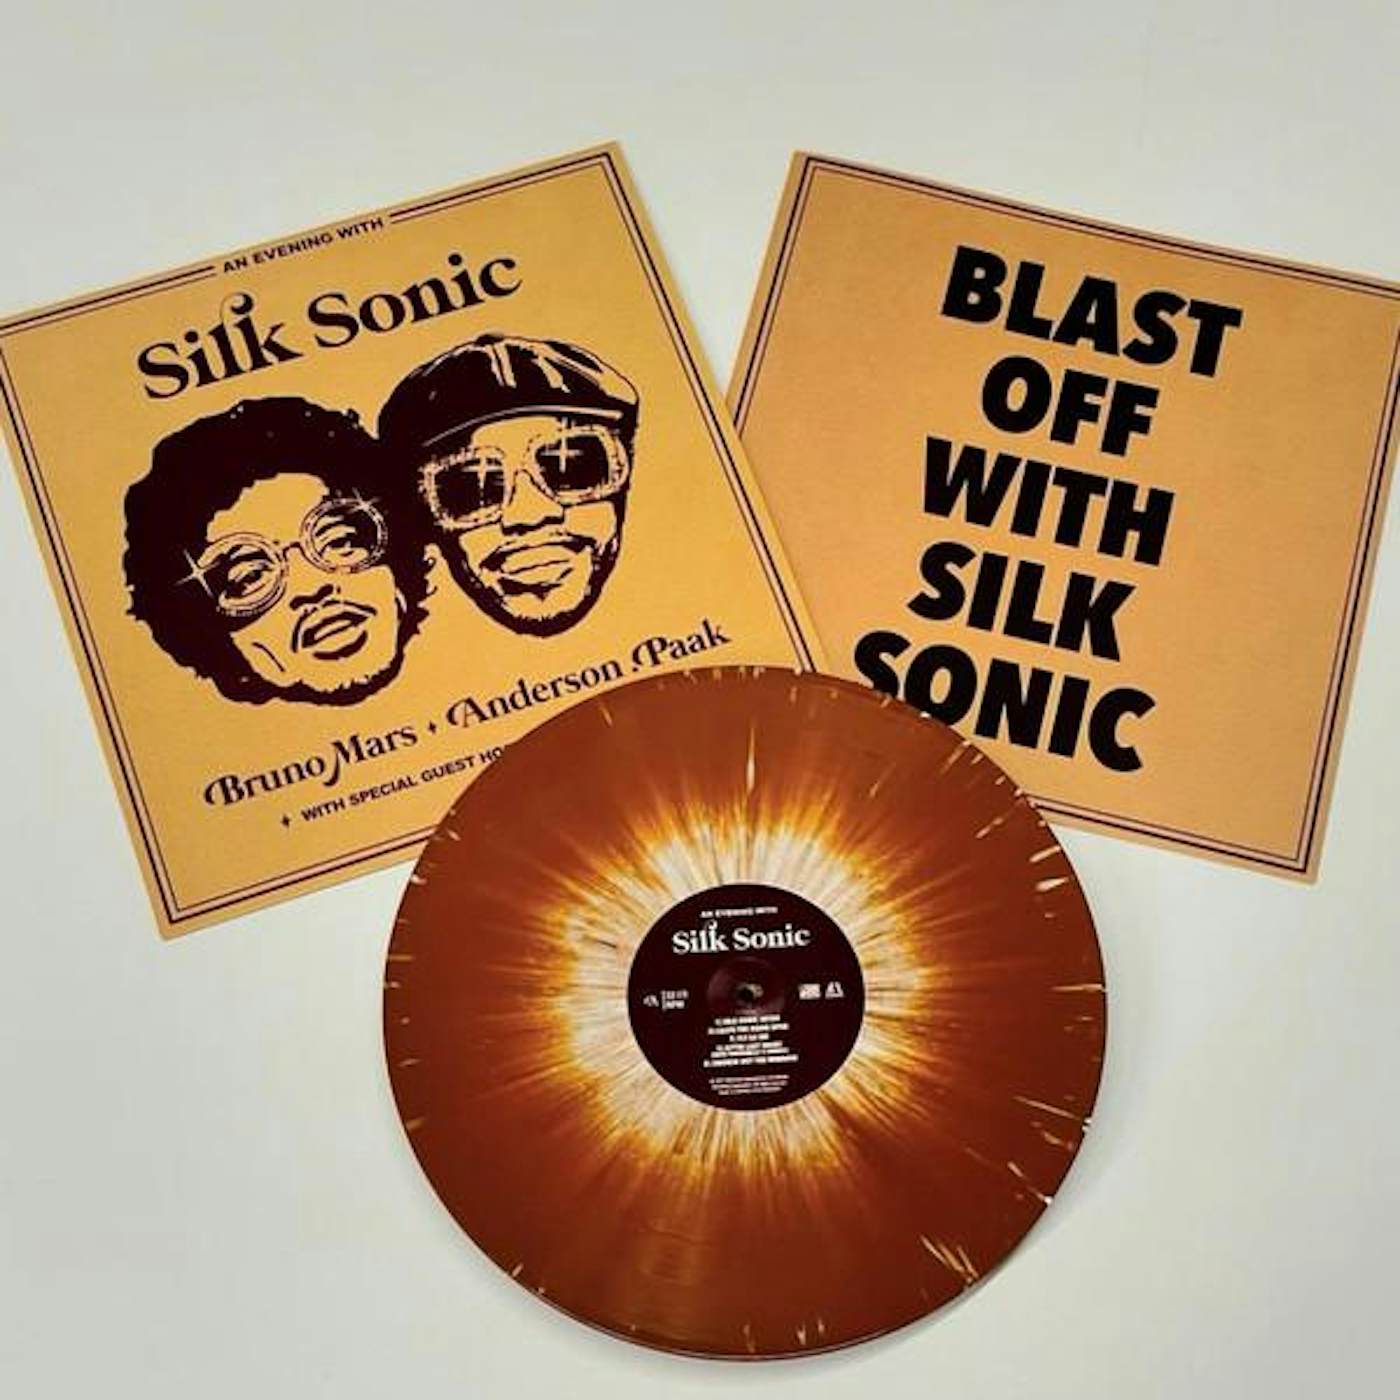 AN EVENING WITH SILK SONIC (BROWN WHITE VINYL) Vinyl Record